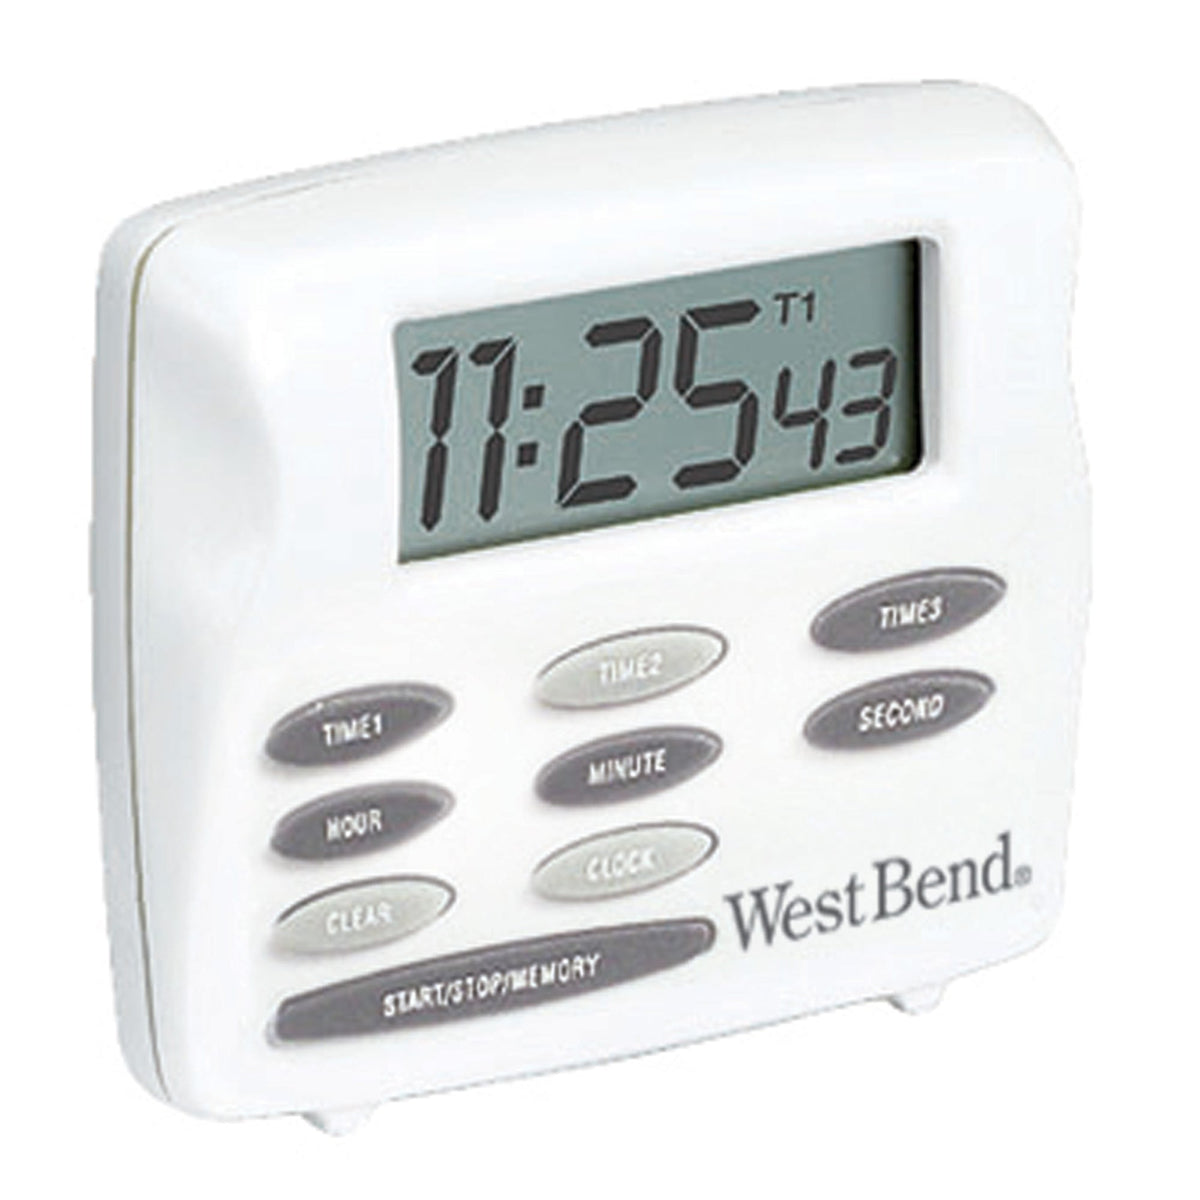 West Bend Versatile Kitchen Timer and Clock with 3 Timing Channels